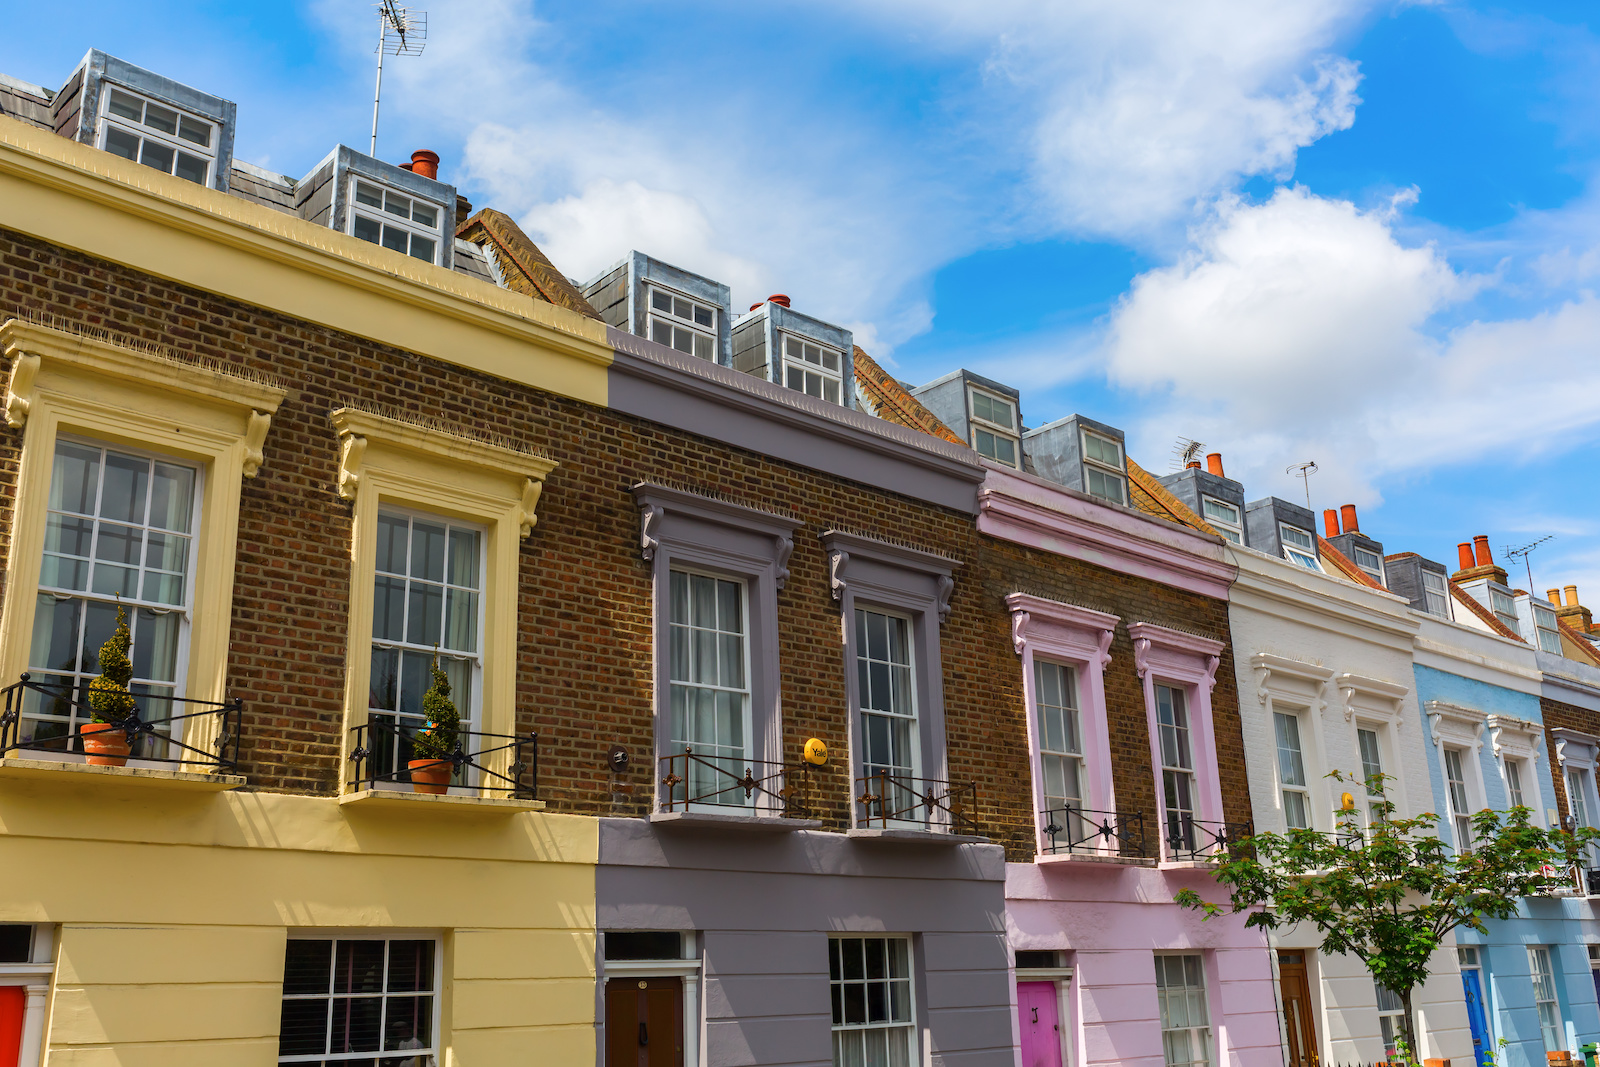 Can a Short Lease Stop You from Selling Your House or Flat?